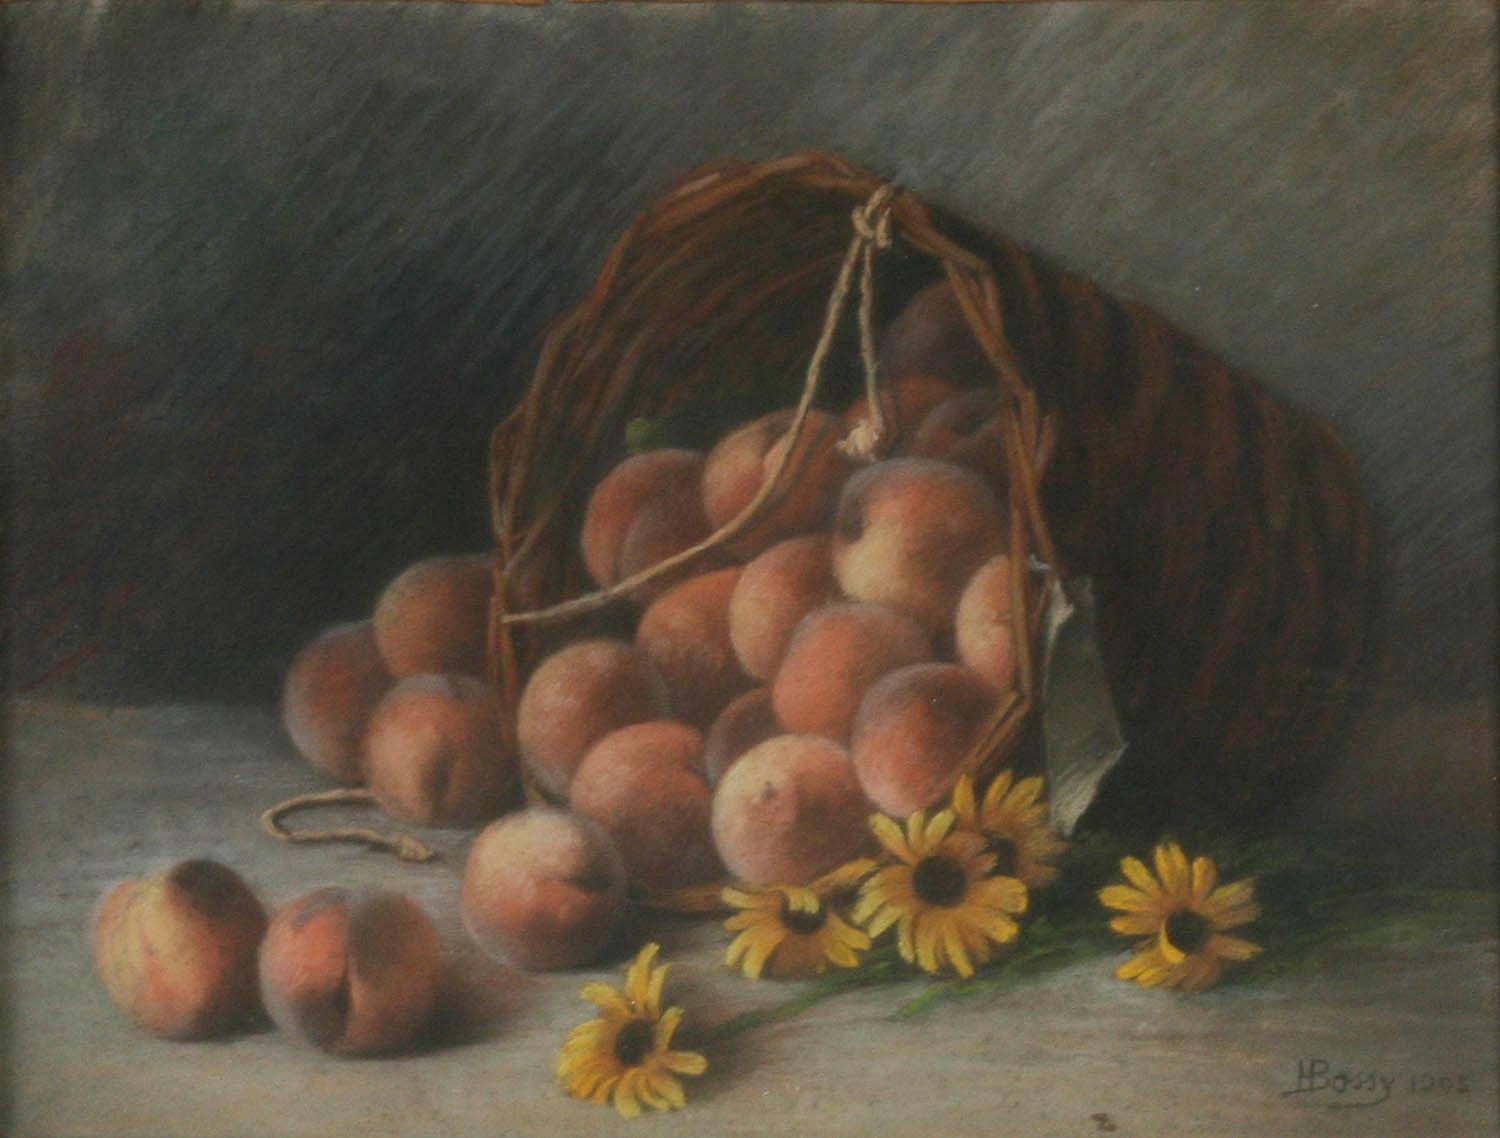 This is a beautiful pastel painting from France. The painting is signed and dated lower right. The painting shows a large basket with an abundance of peaches, with some yellow daisies in the foreground. The sober gray background makes the colorful